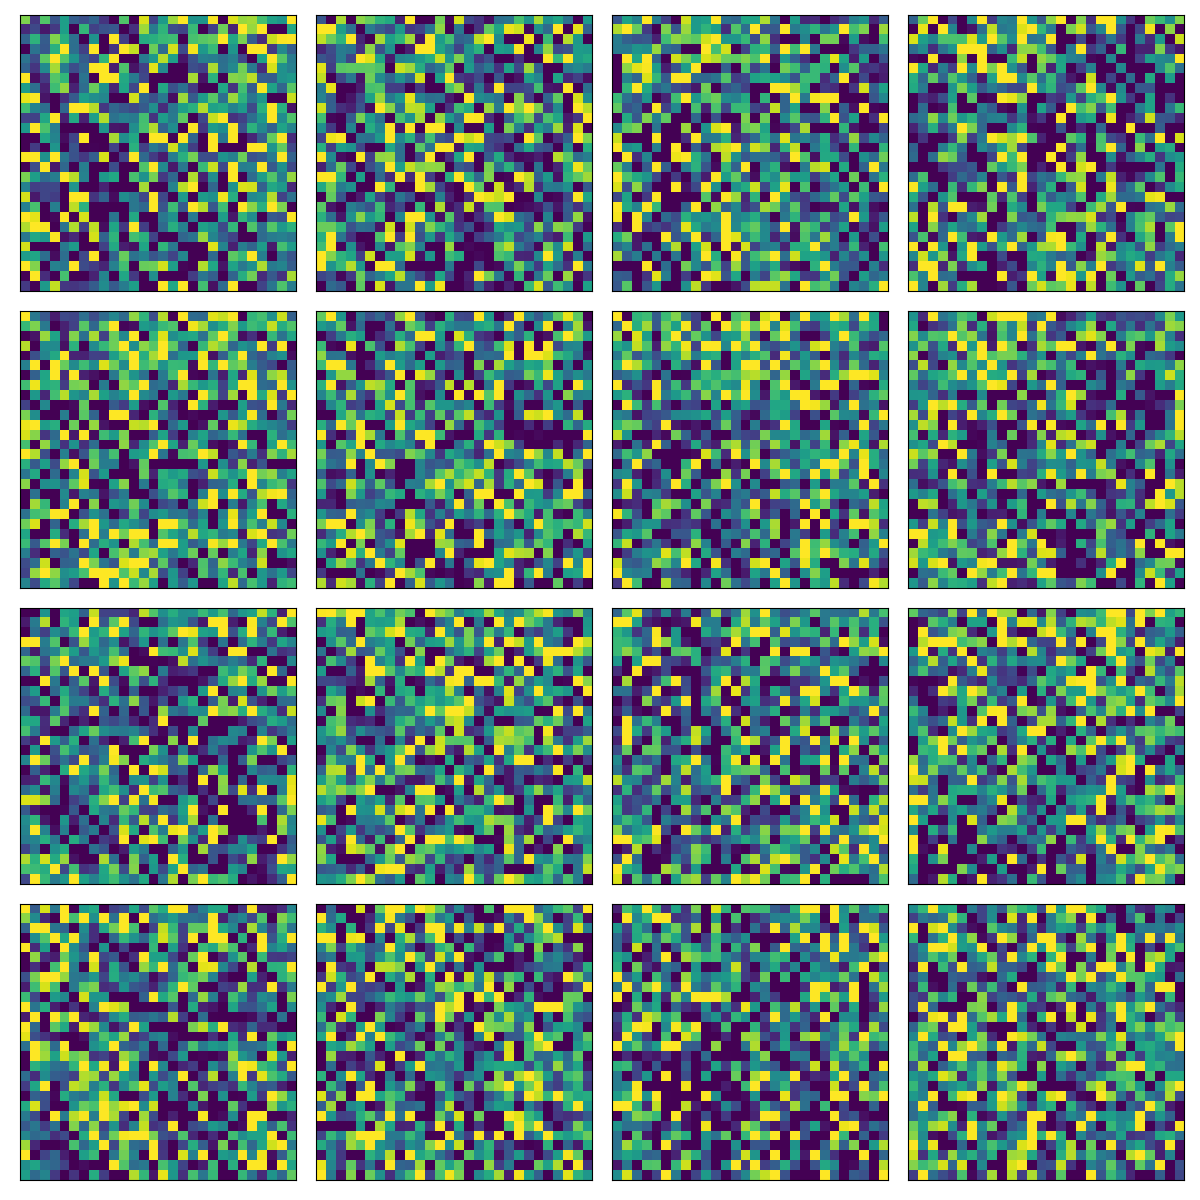 sampled-mnist-pixels-from-trained-model